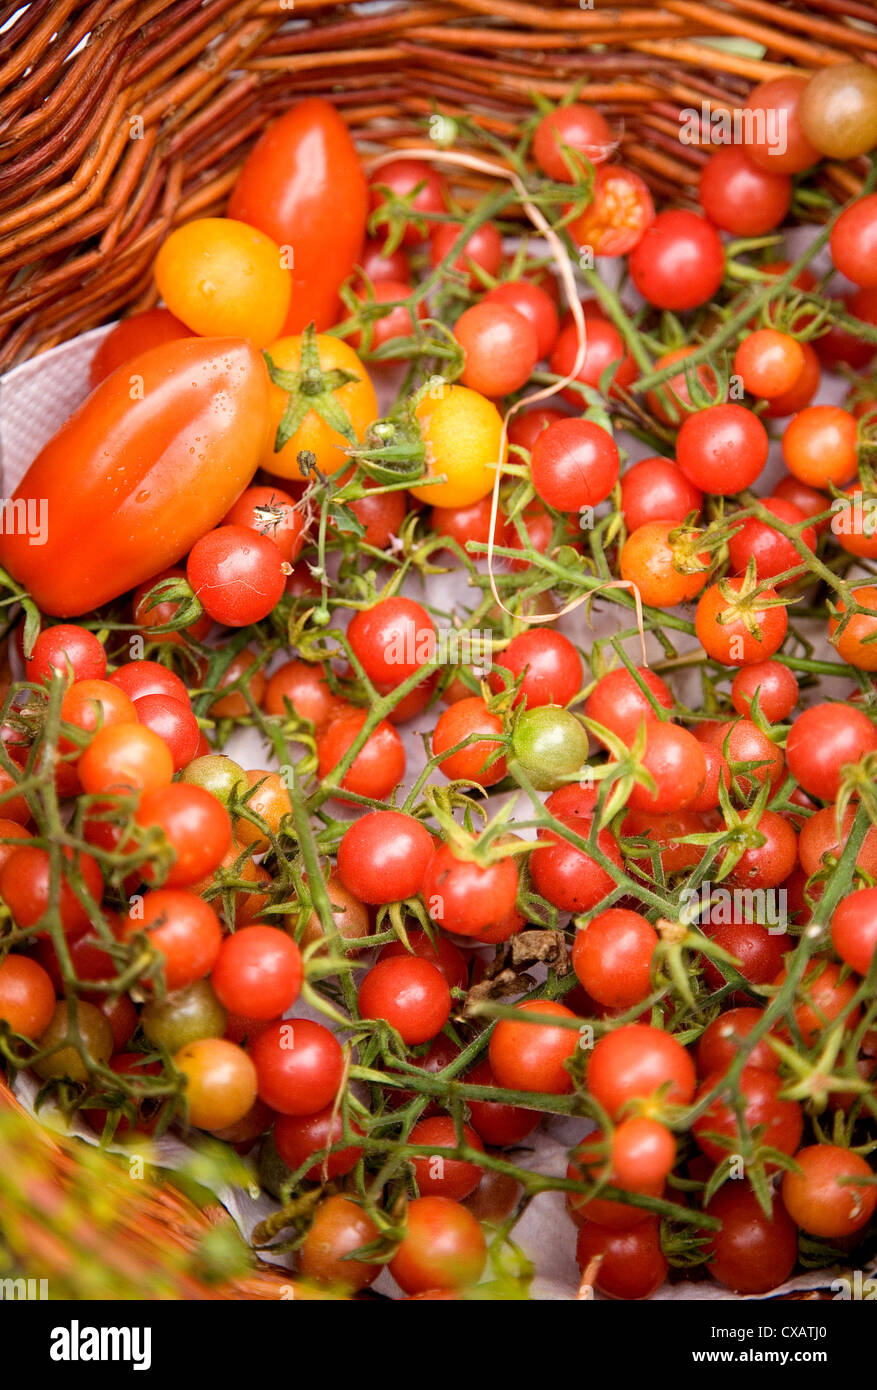 Riedlingen, tomatoes at a farmers market Stock Photo